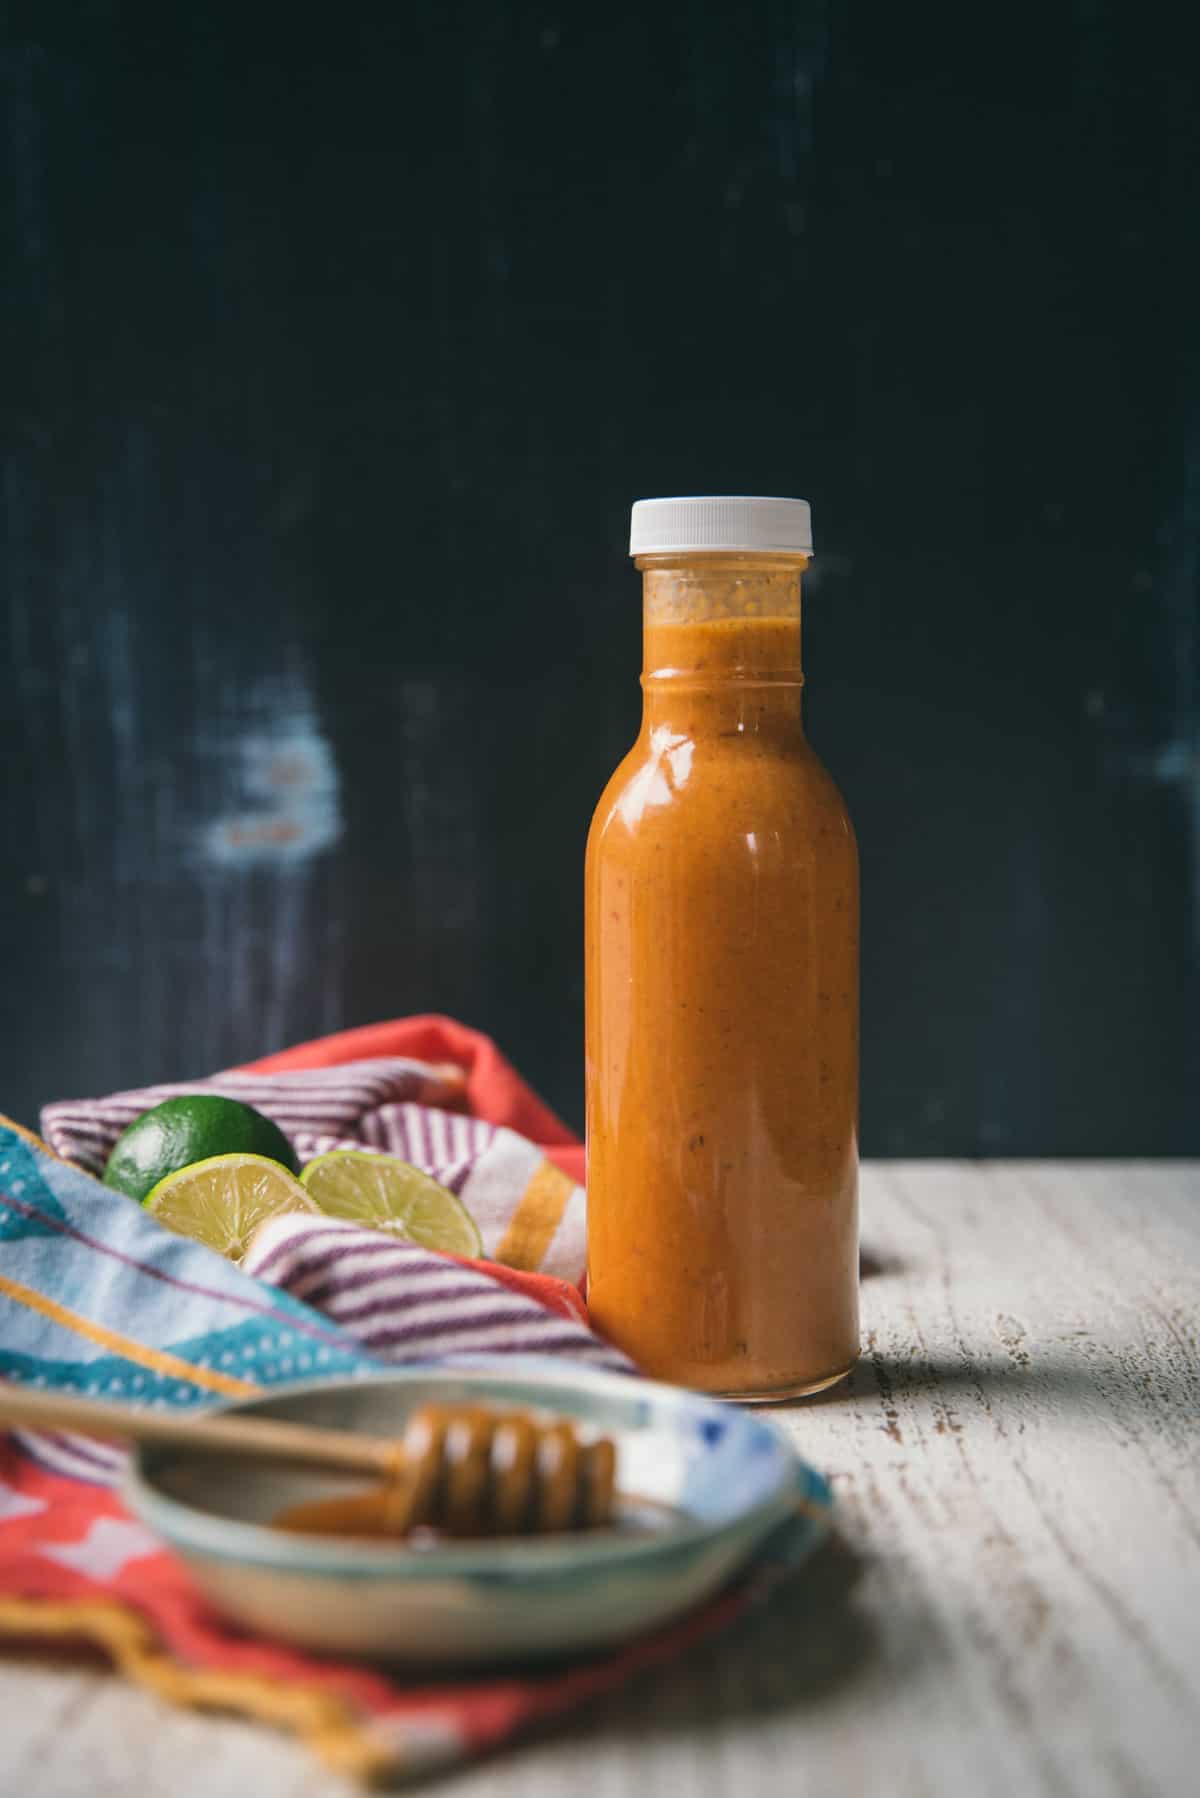 chipotle dressing in a bottle with blue background